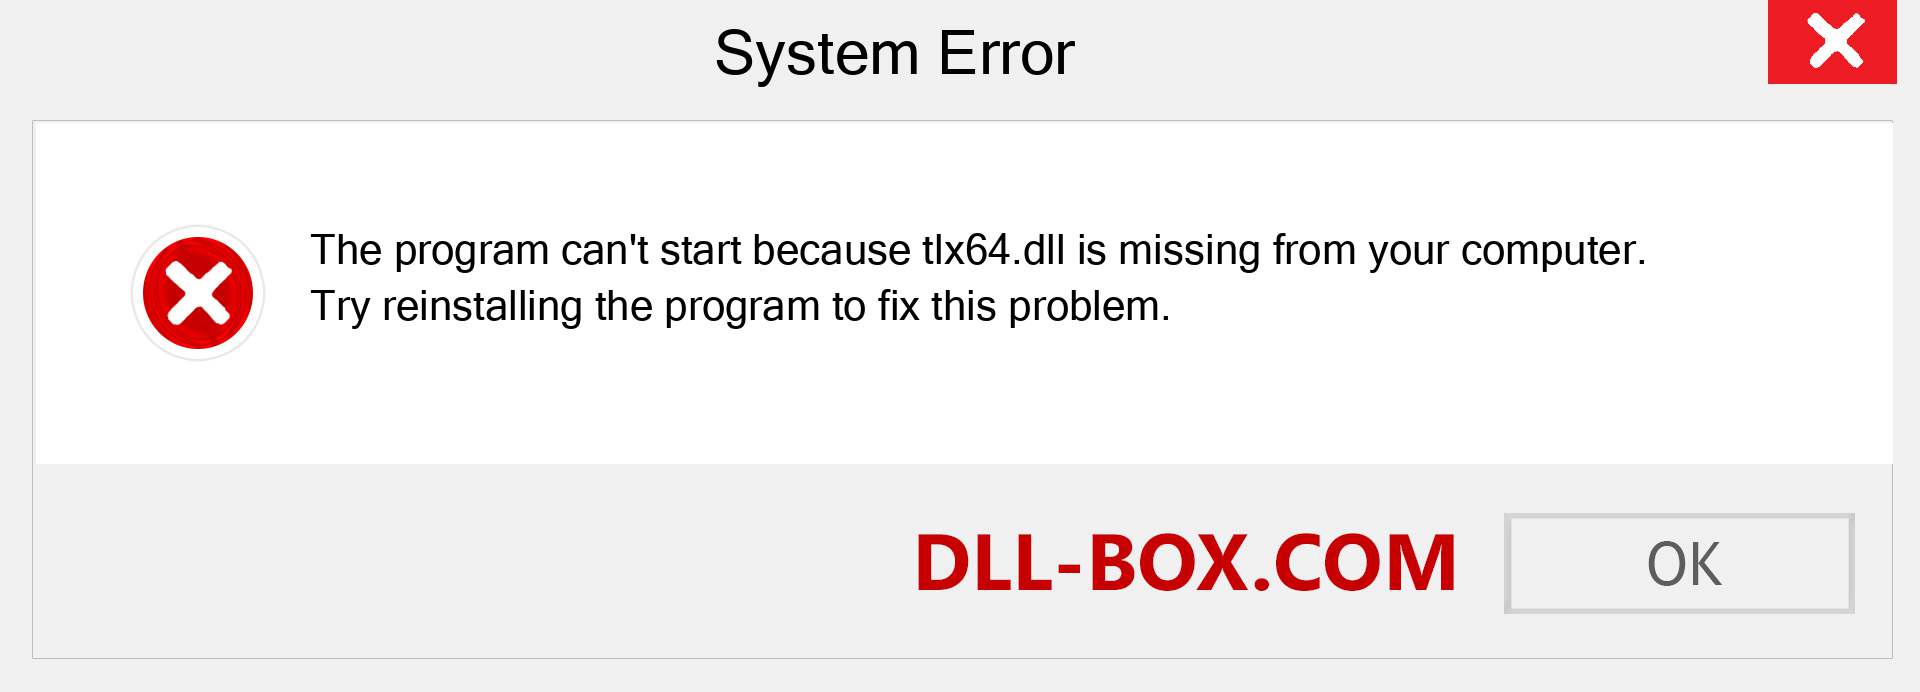  tlx64.dll file is missing?. Download for Windows 7, 8, 10 - Fix  tlx64 dll Missing Error on Windows, photos, images